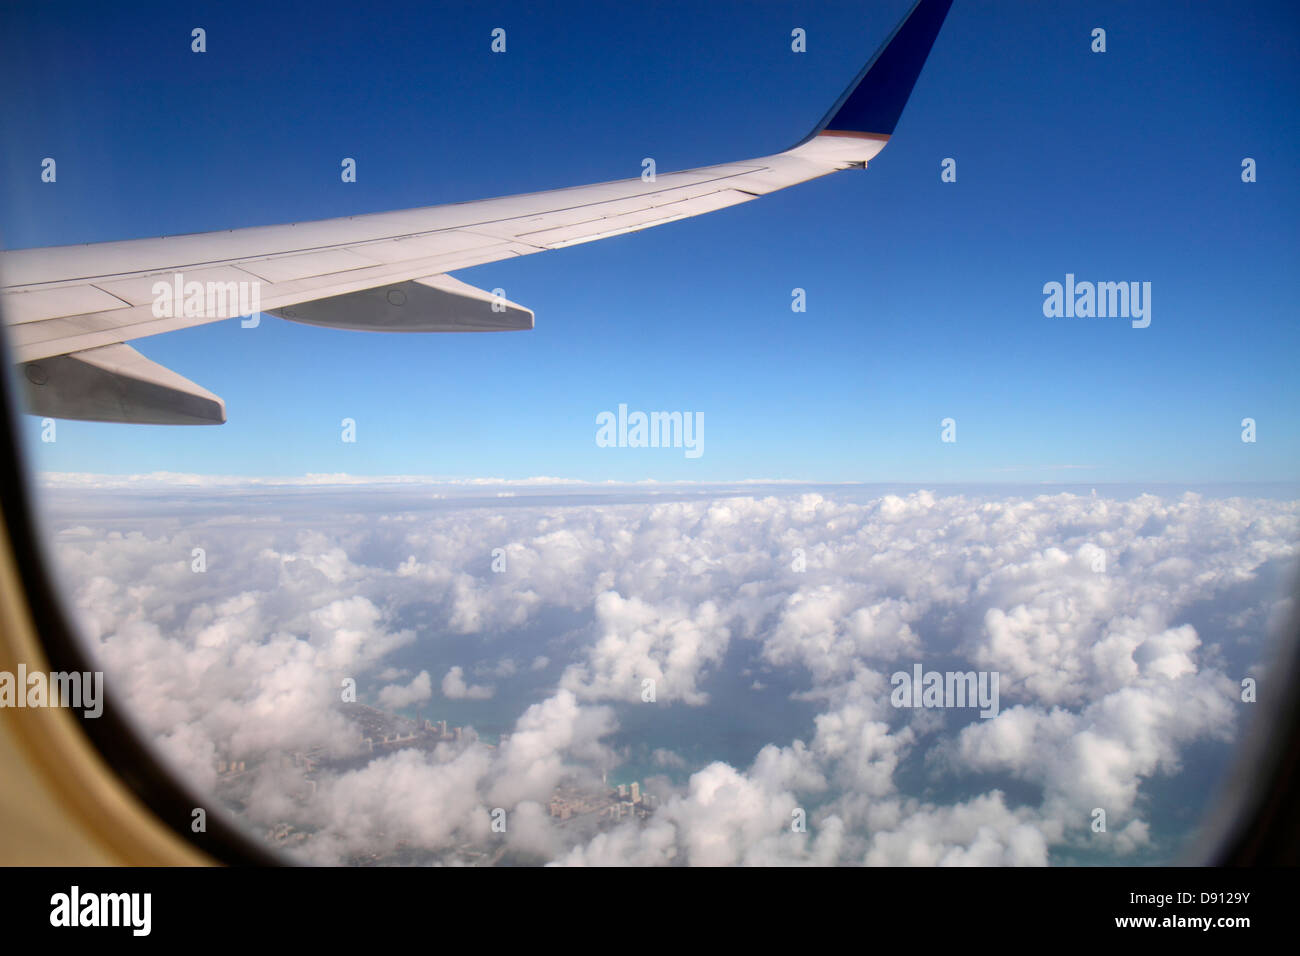 Miami Florida,International Airport,MIA,inflight,passenger cabin,United Airlines,passenger cabin,inflight,window seat,view,wing,clouds,blue sky,aerial Stock Photo